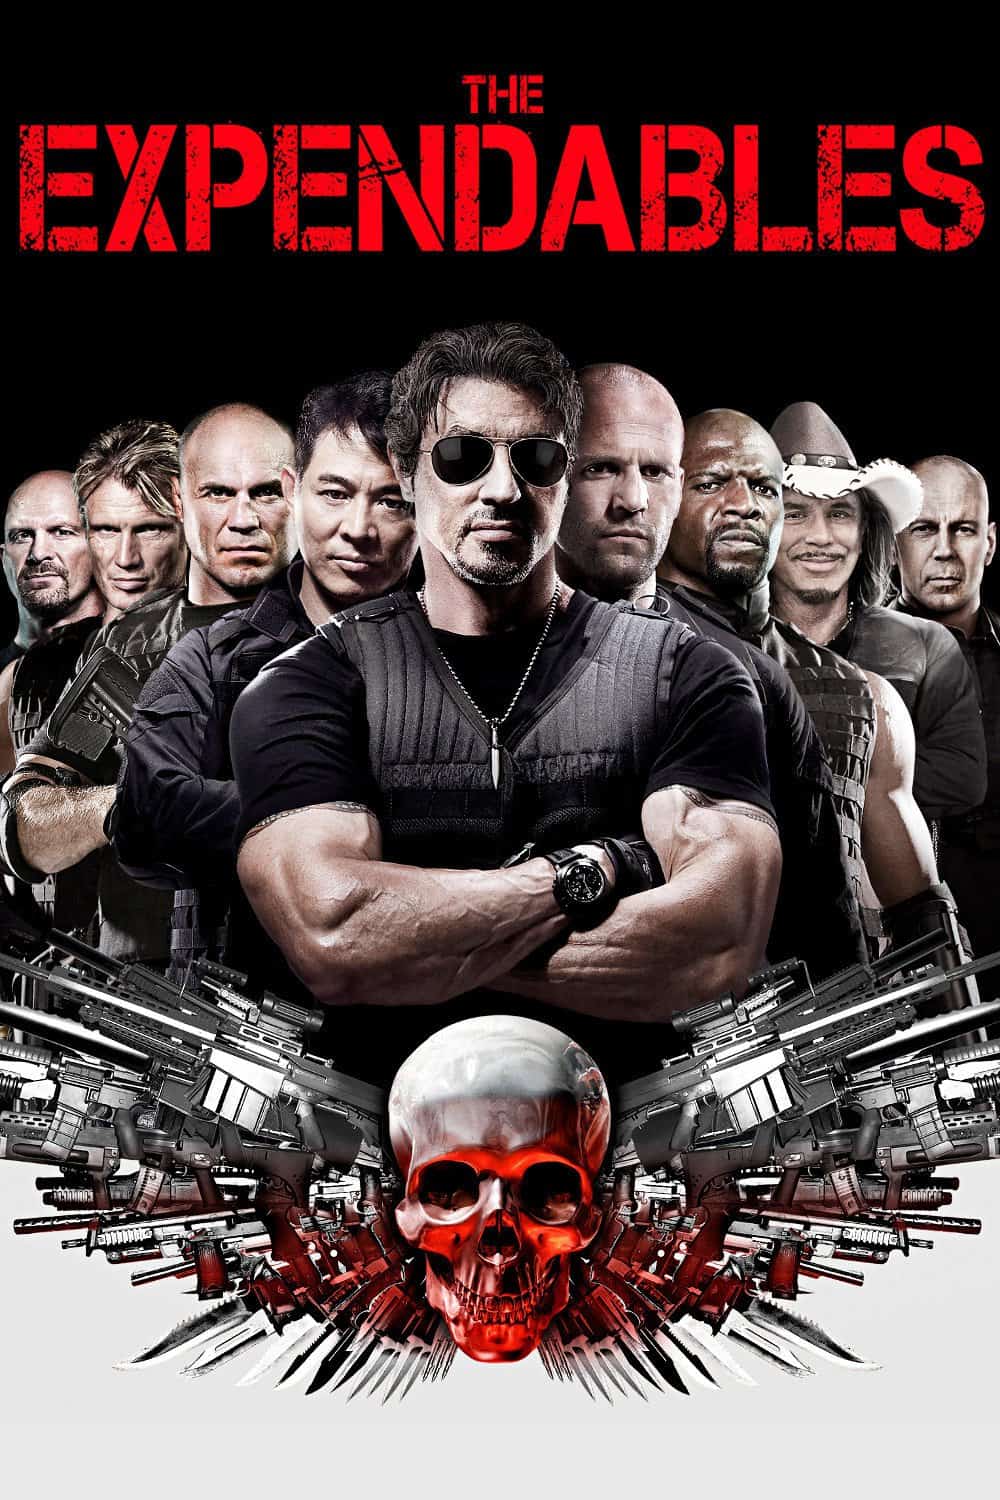 The Expendables, 2010 